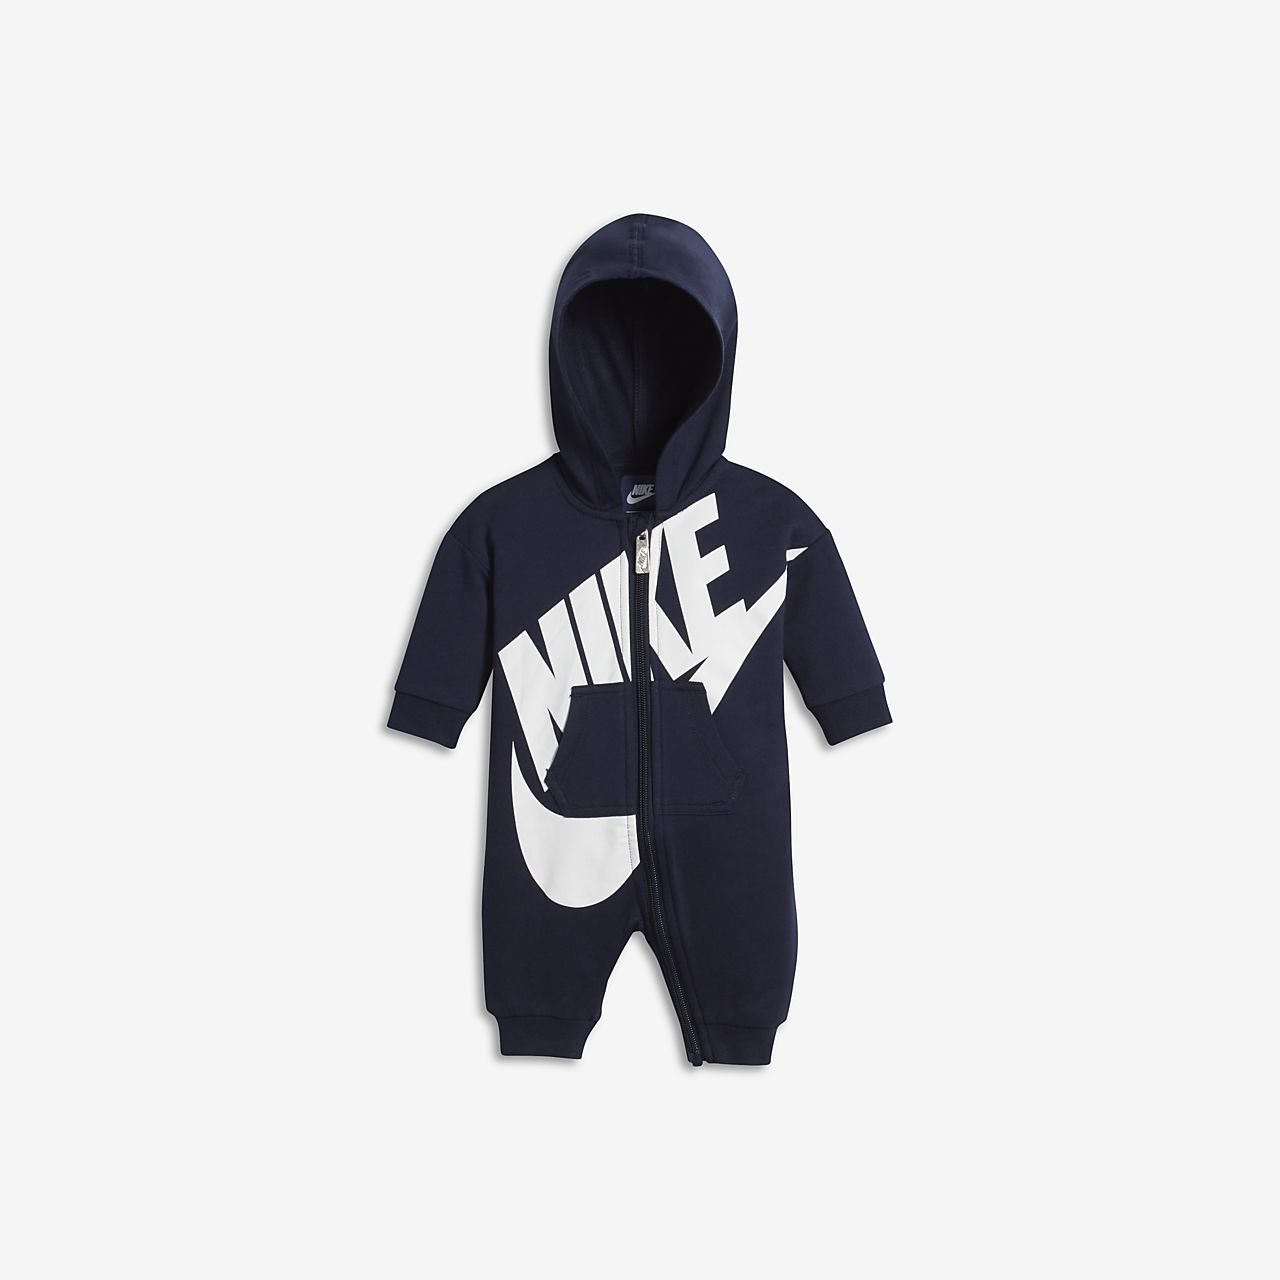 baby nike coverall